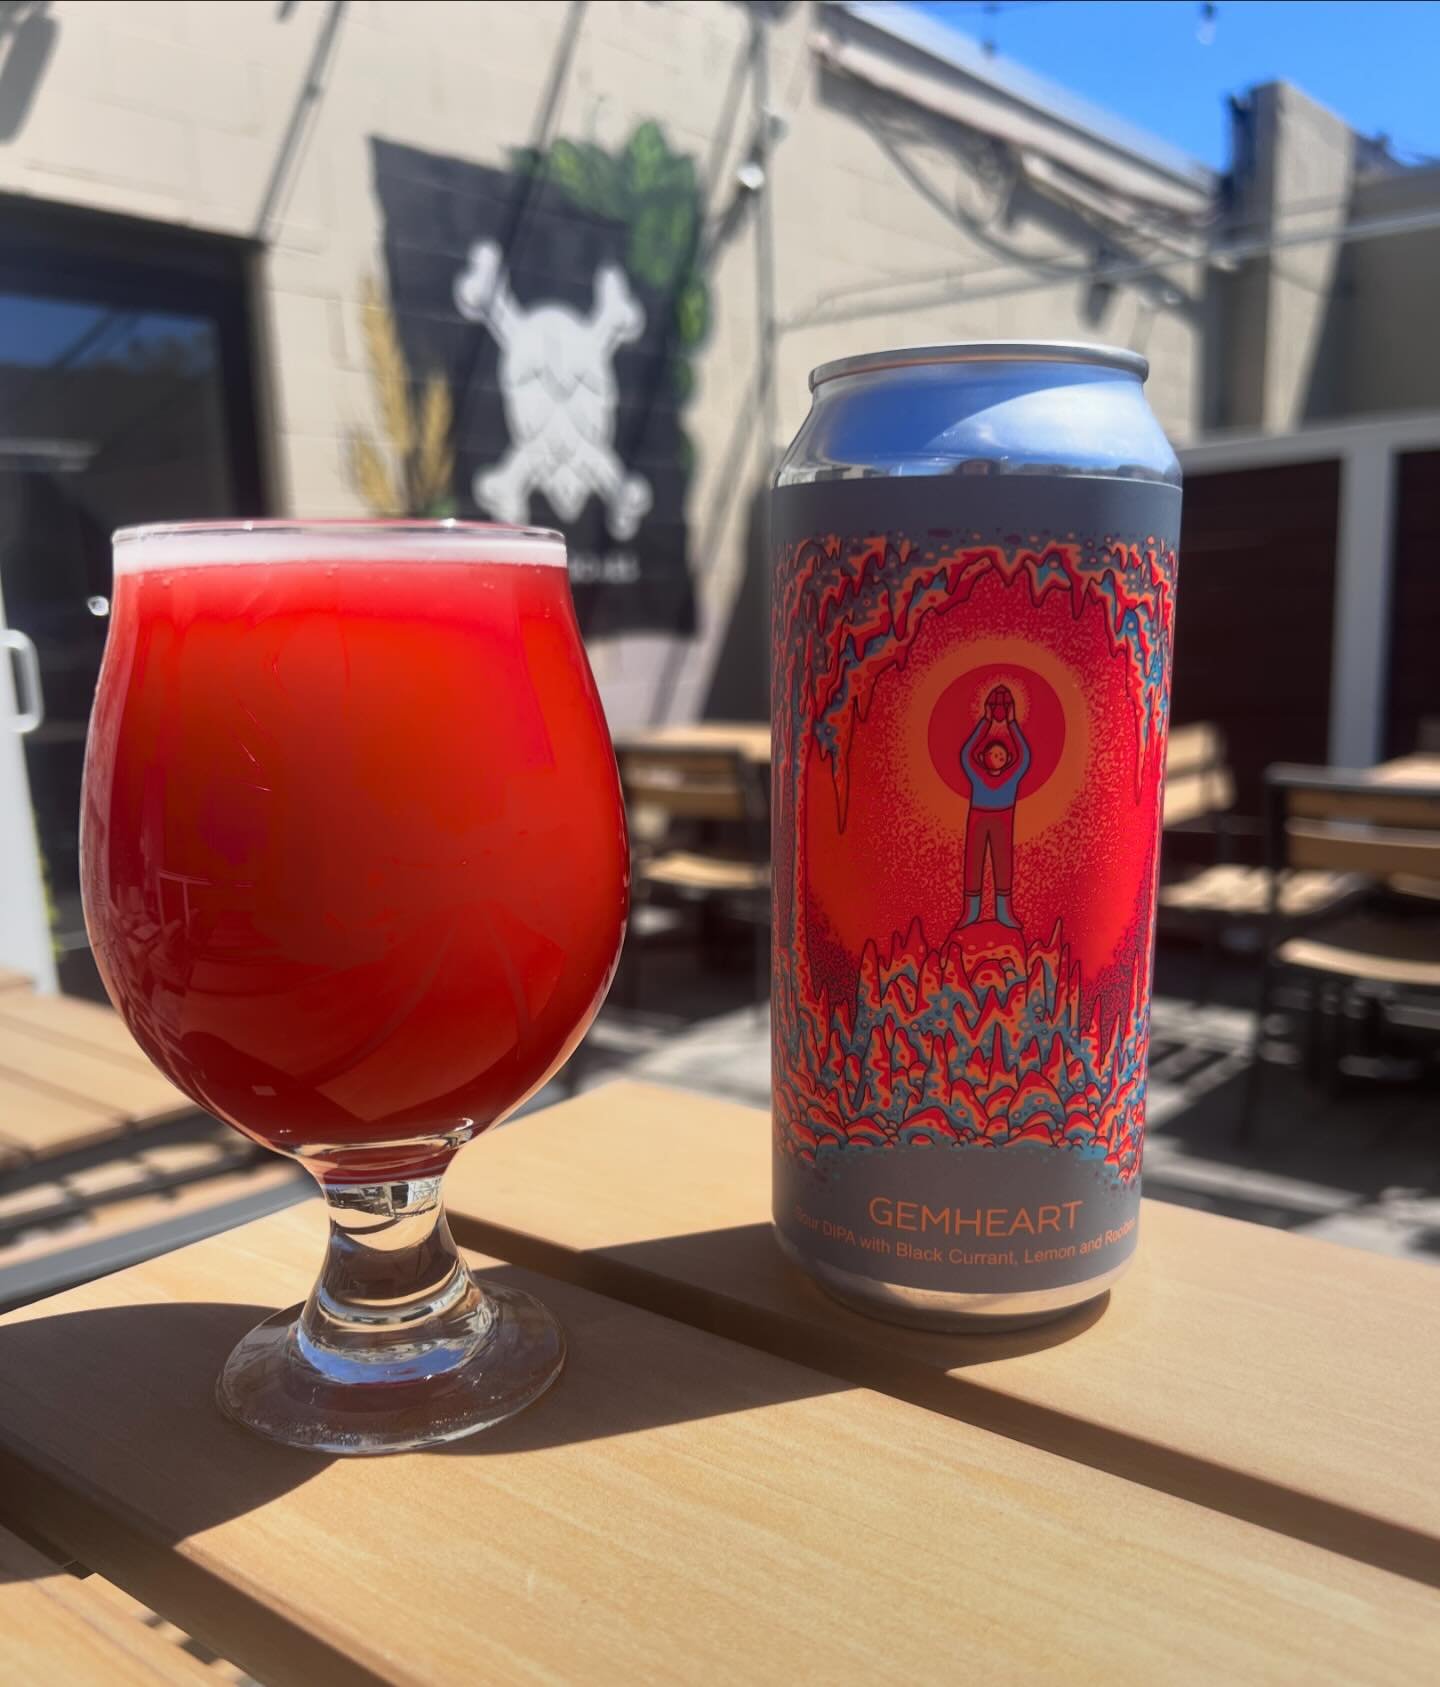 .

&bull;Good Morning from the Patio! 

&bull;Currently featuring Gemheart by @hudsonvalleybrewery A Sour DIPA with Black Currant, Lemon, and Rooibos. Available on draft or take home can. 

&bull;Come hang with us all day and all night! 

&bull;Happy